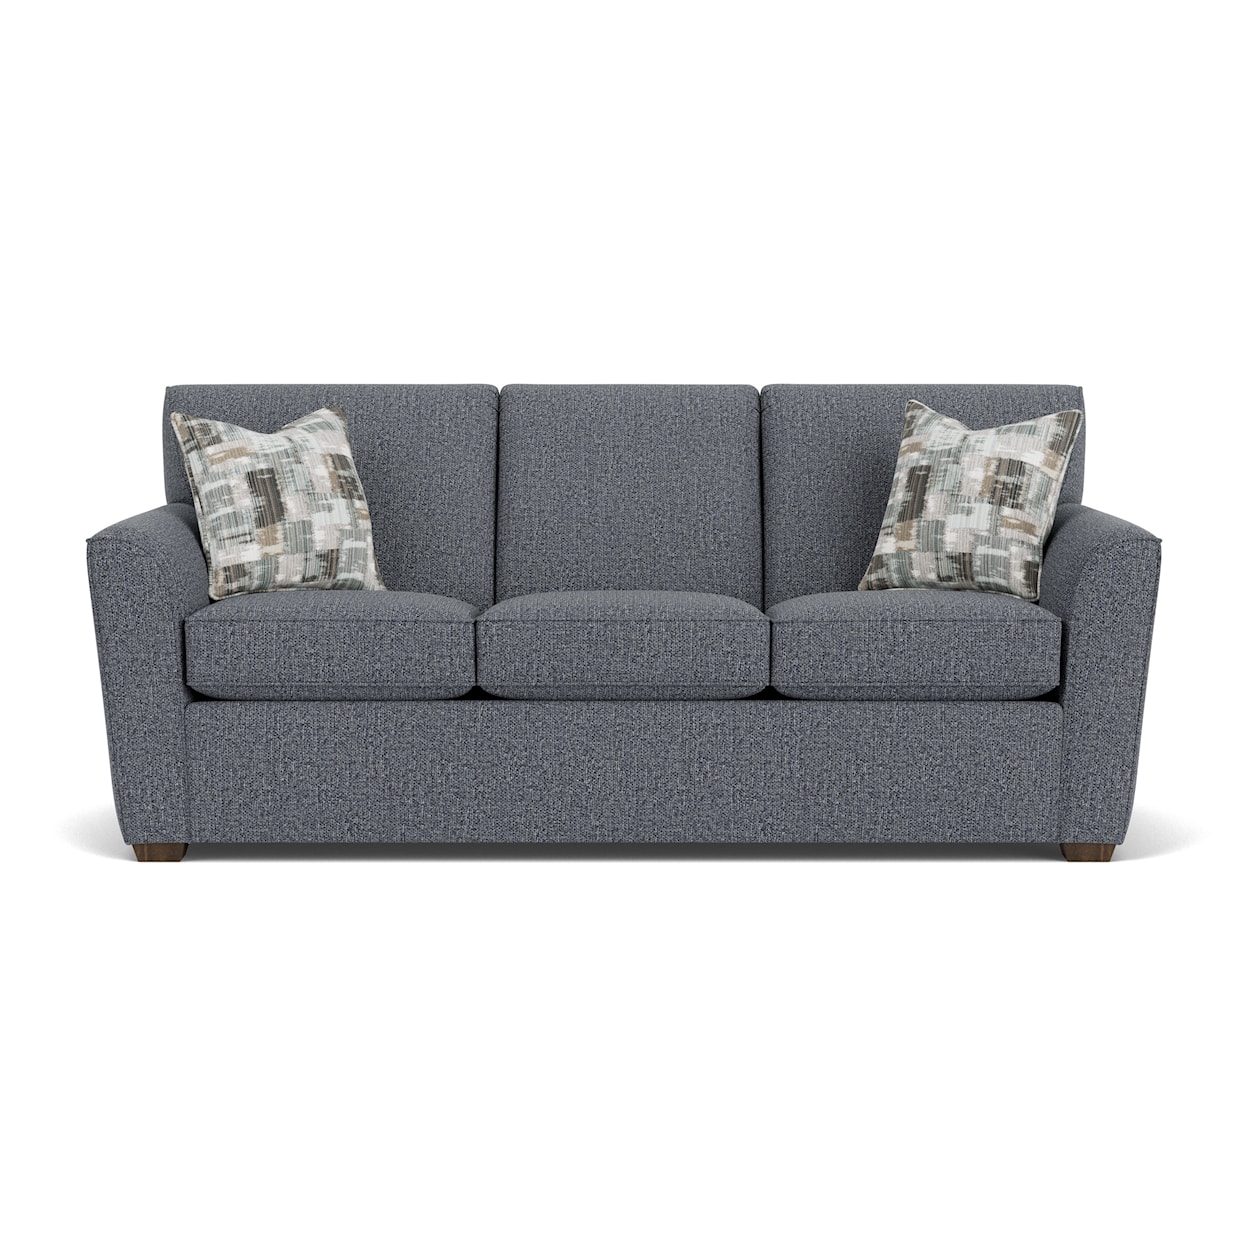 Flexsteel Lakewood 1394657 Casual Queen Sleeper Sofa with Flair Tapered ...